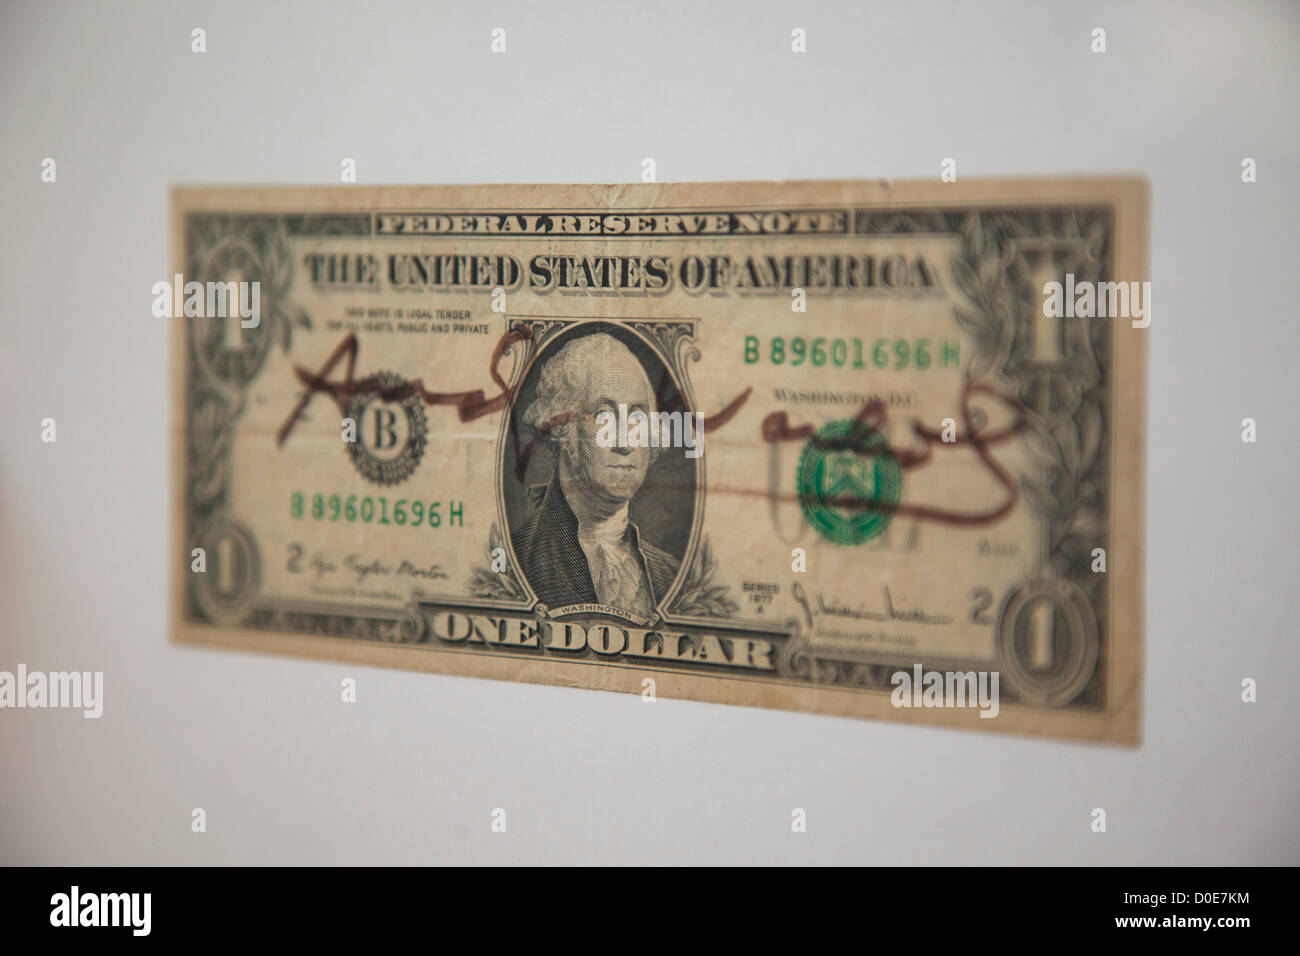 London, UK. Friday 23rd November 2012. Christies auction house showcasing memorabilia from every decade of the past century of popular culture from the industries of film and music. One dollar bill signed by Andy Warhol. Stock Photo